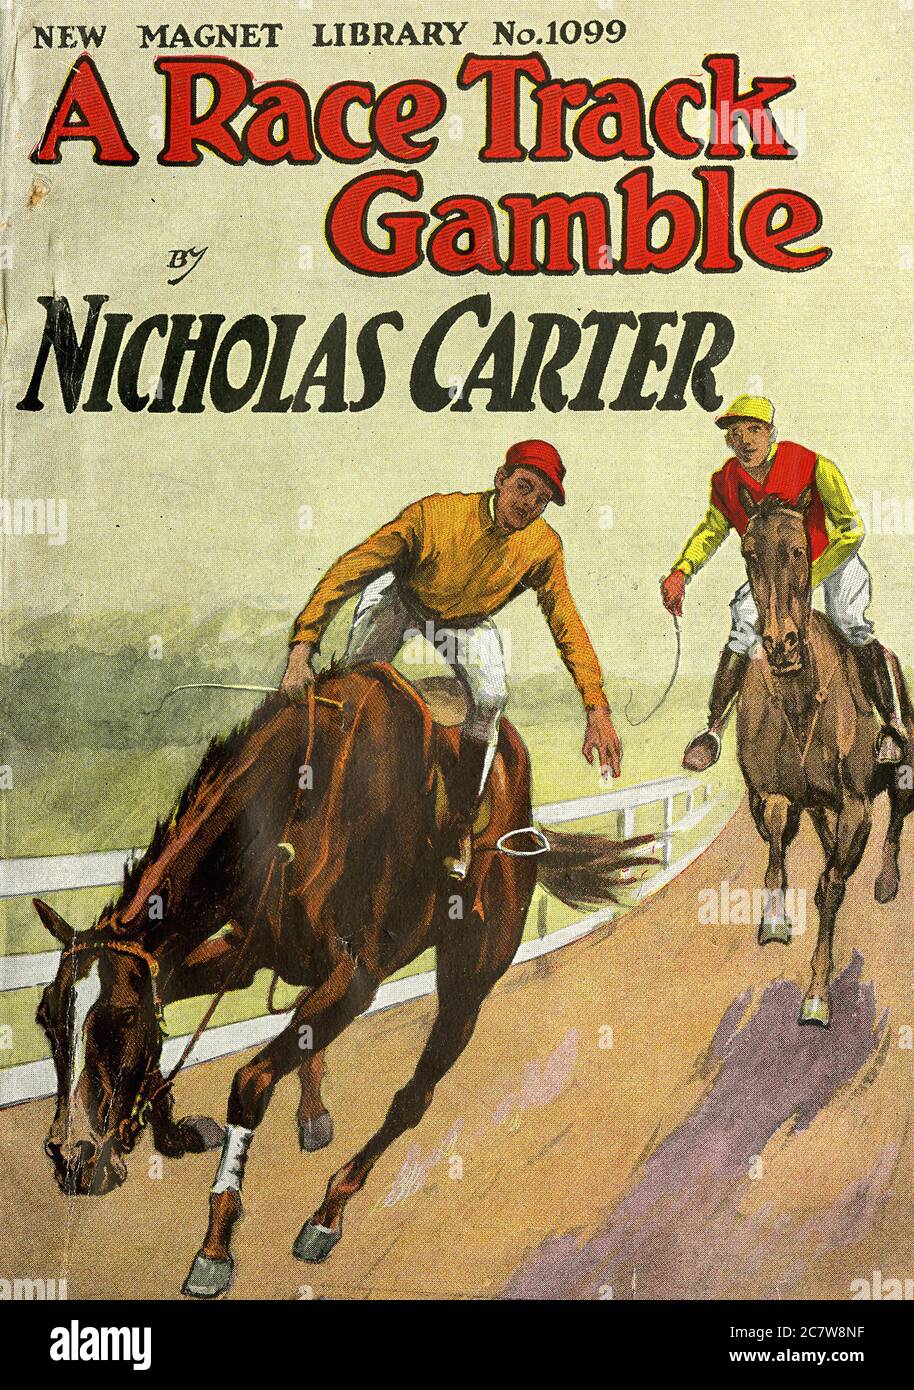 Nicholas Carter - A Racetrack Gamble - New Magnet Library - Vintage Pulp Literary Stock Photo